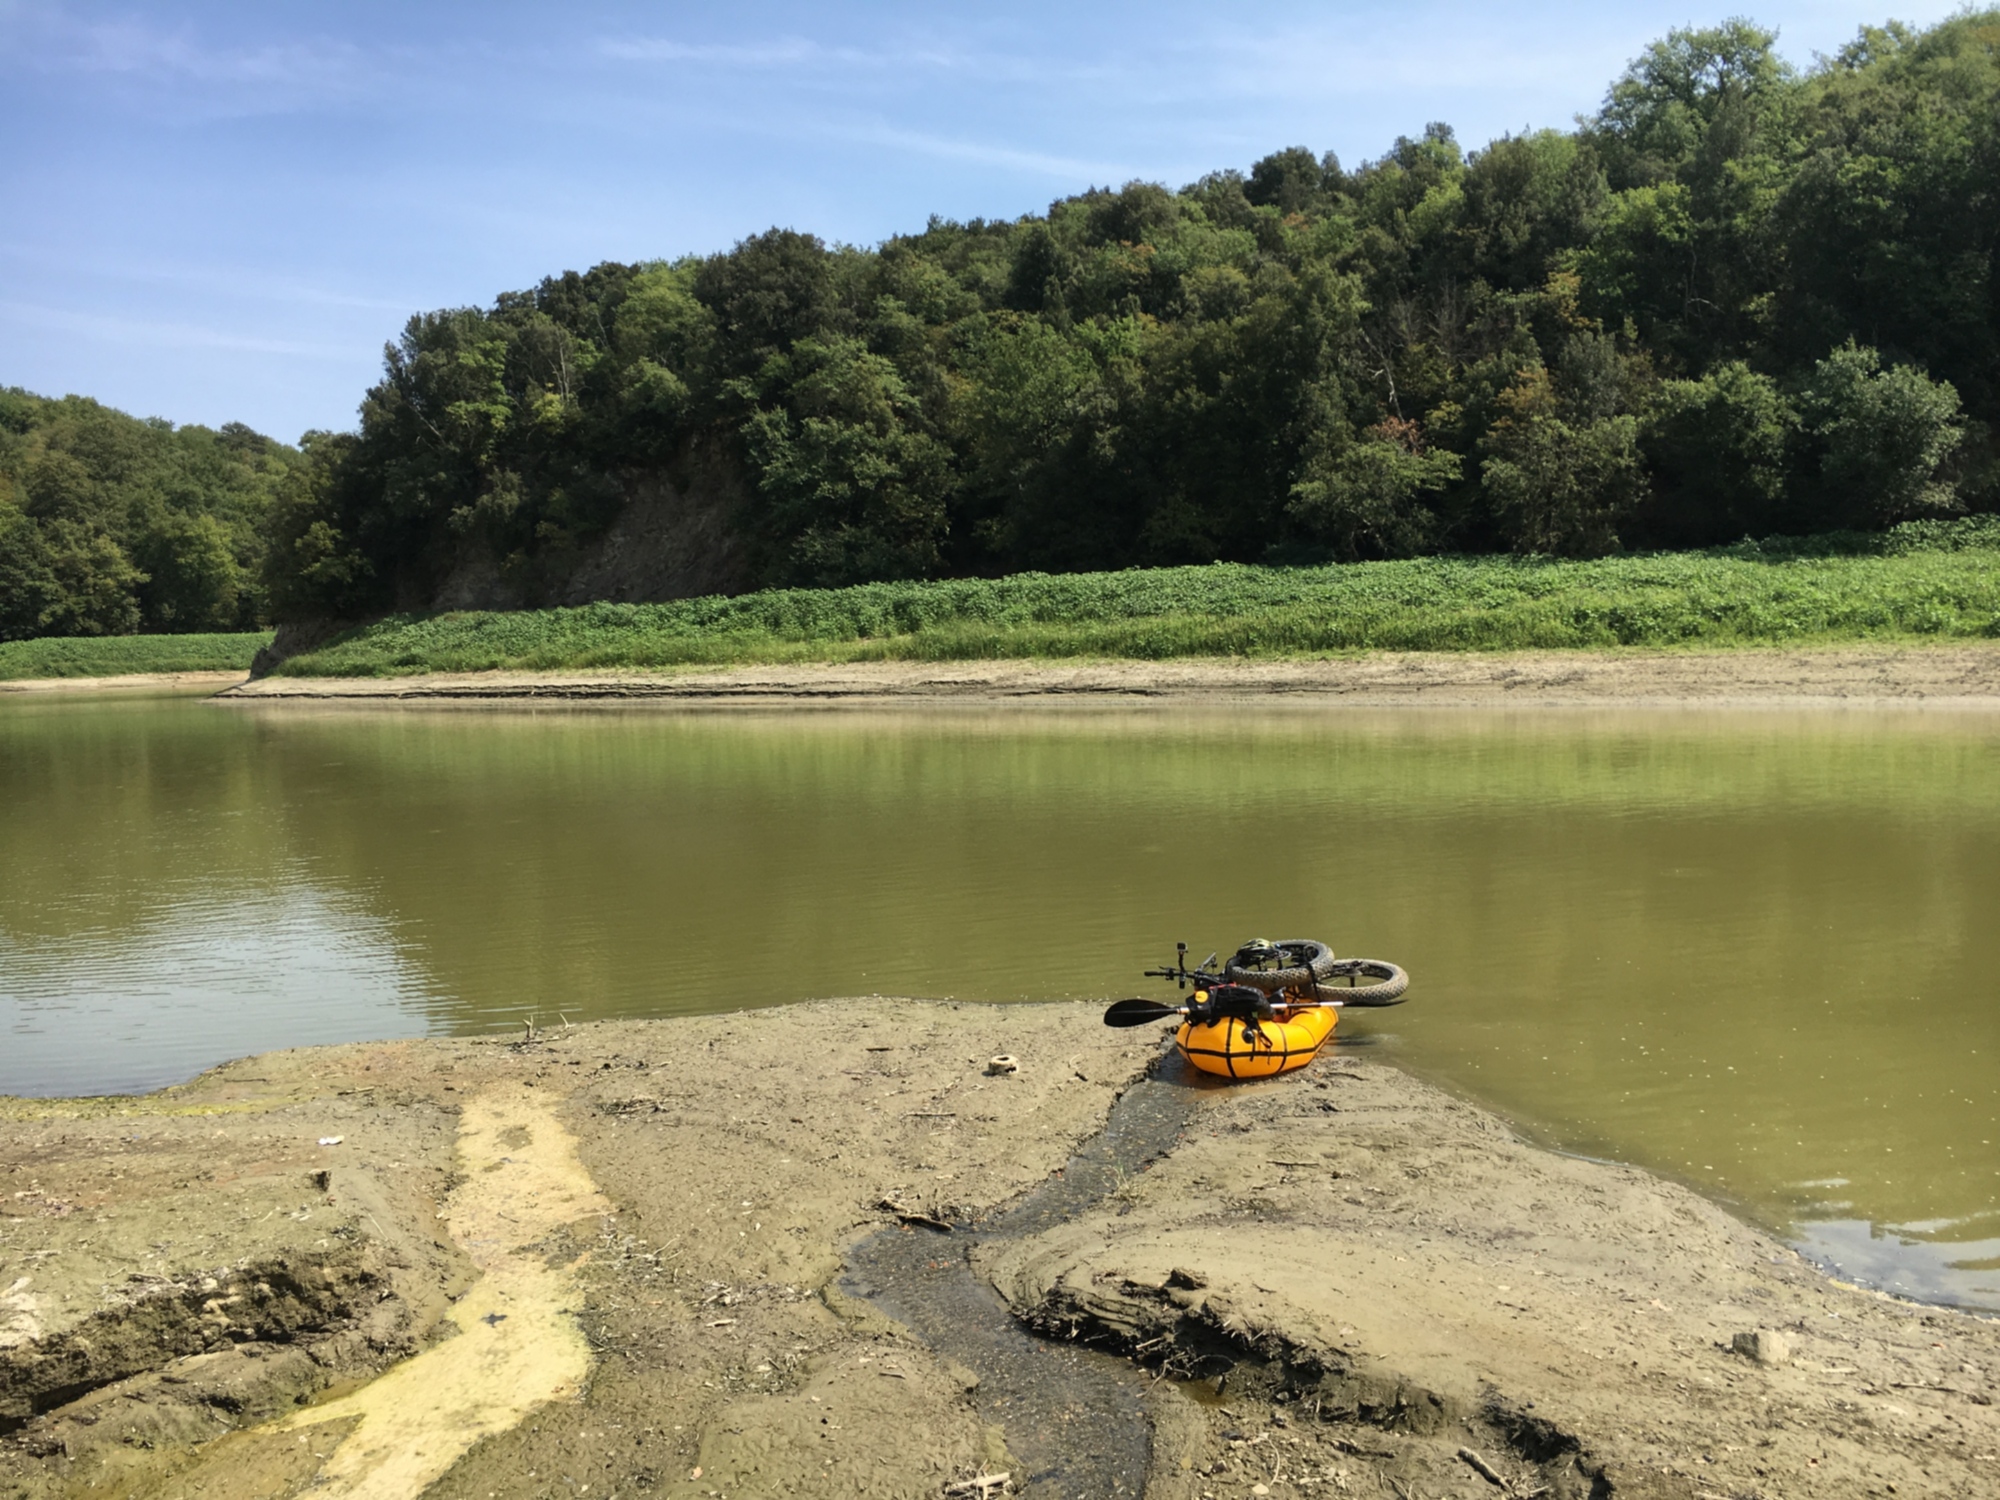 Kayak experience in the Valdarno area